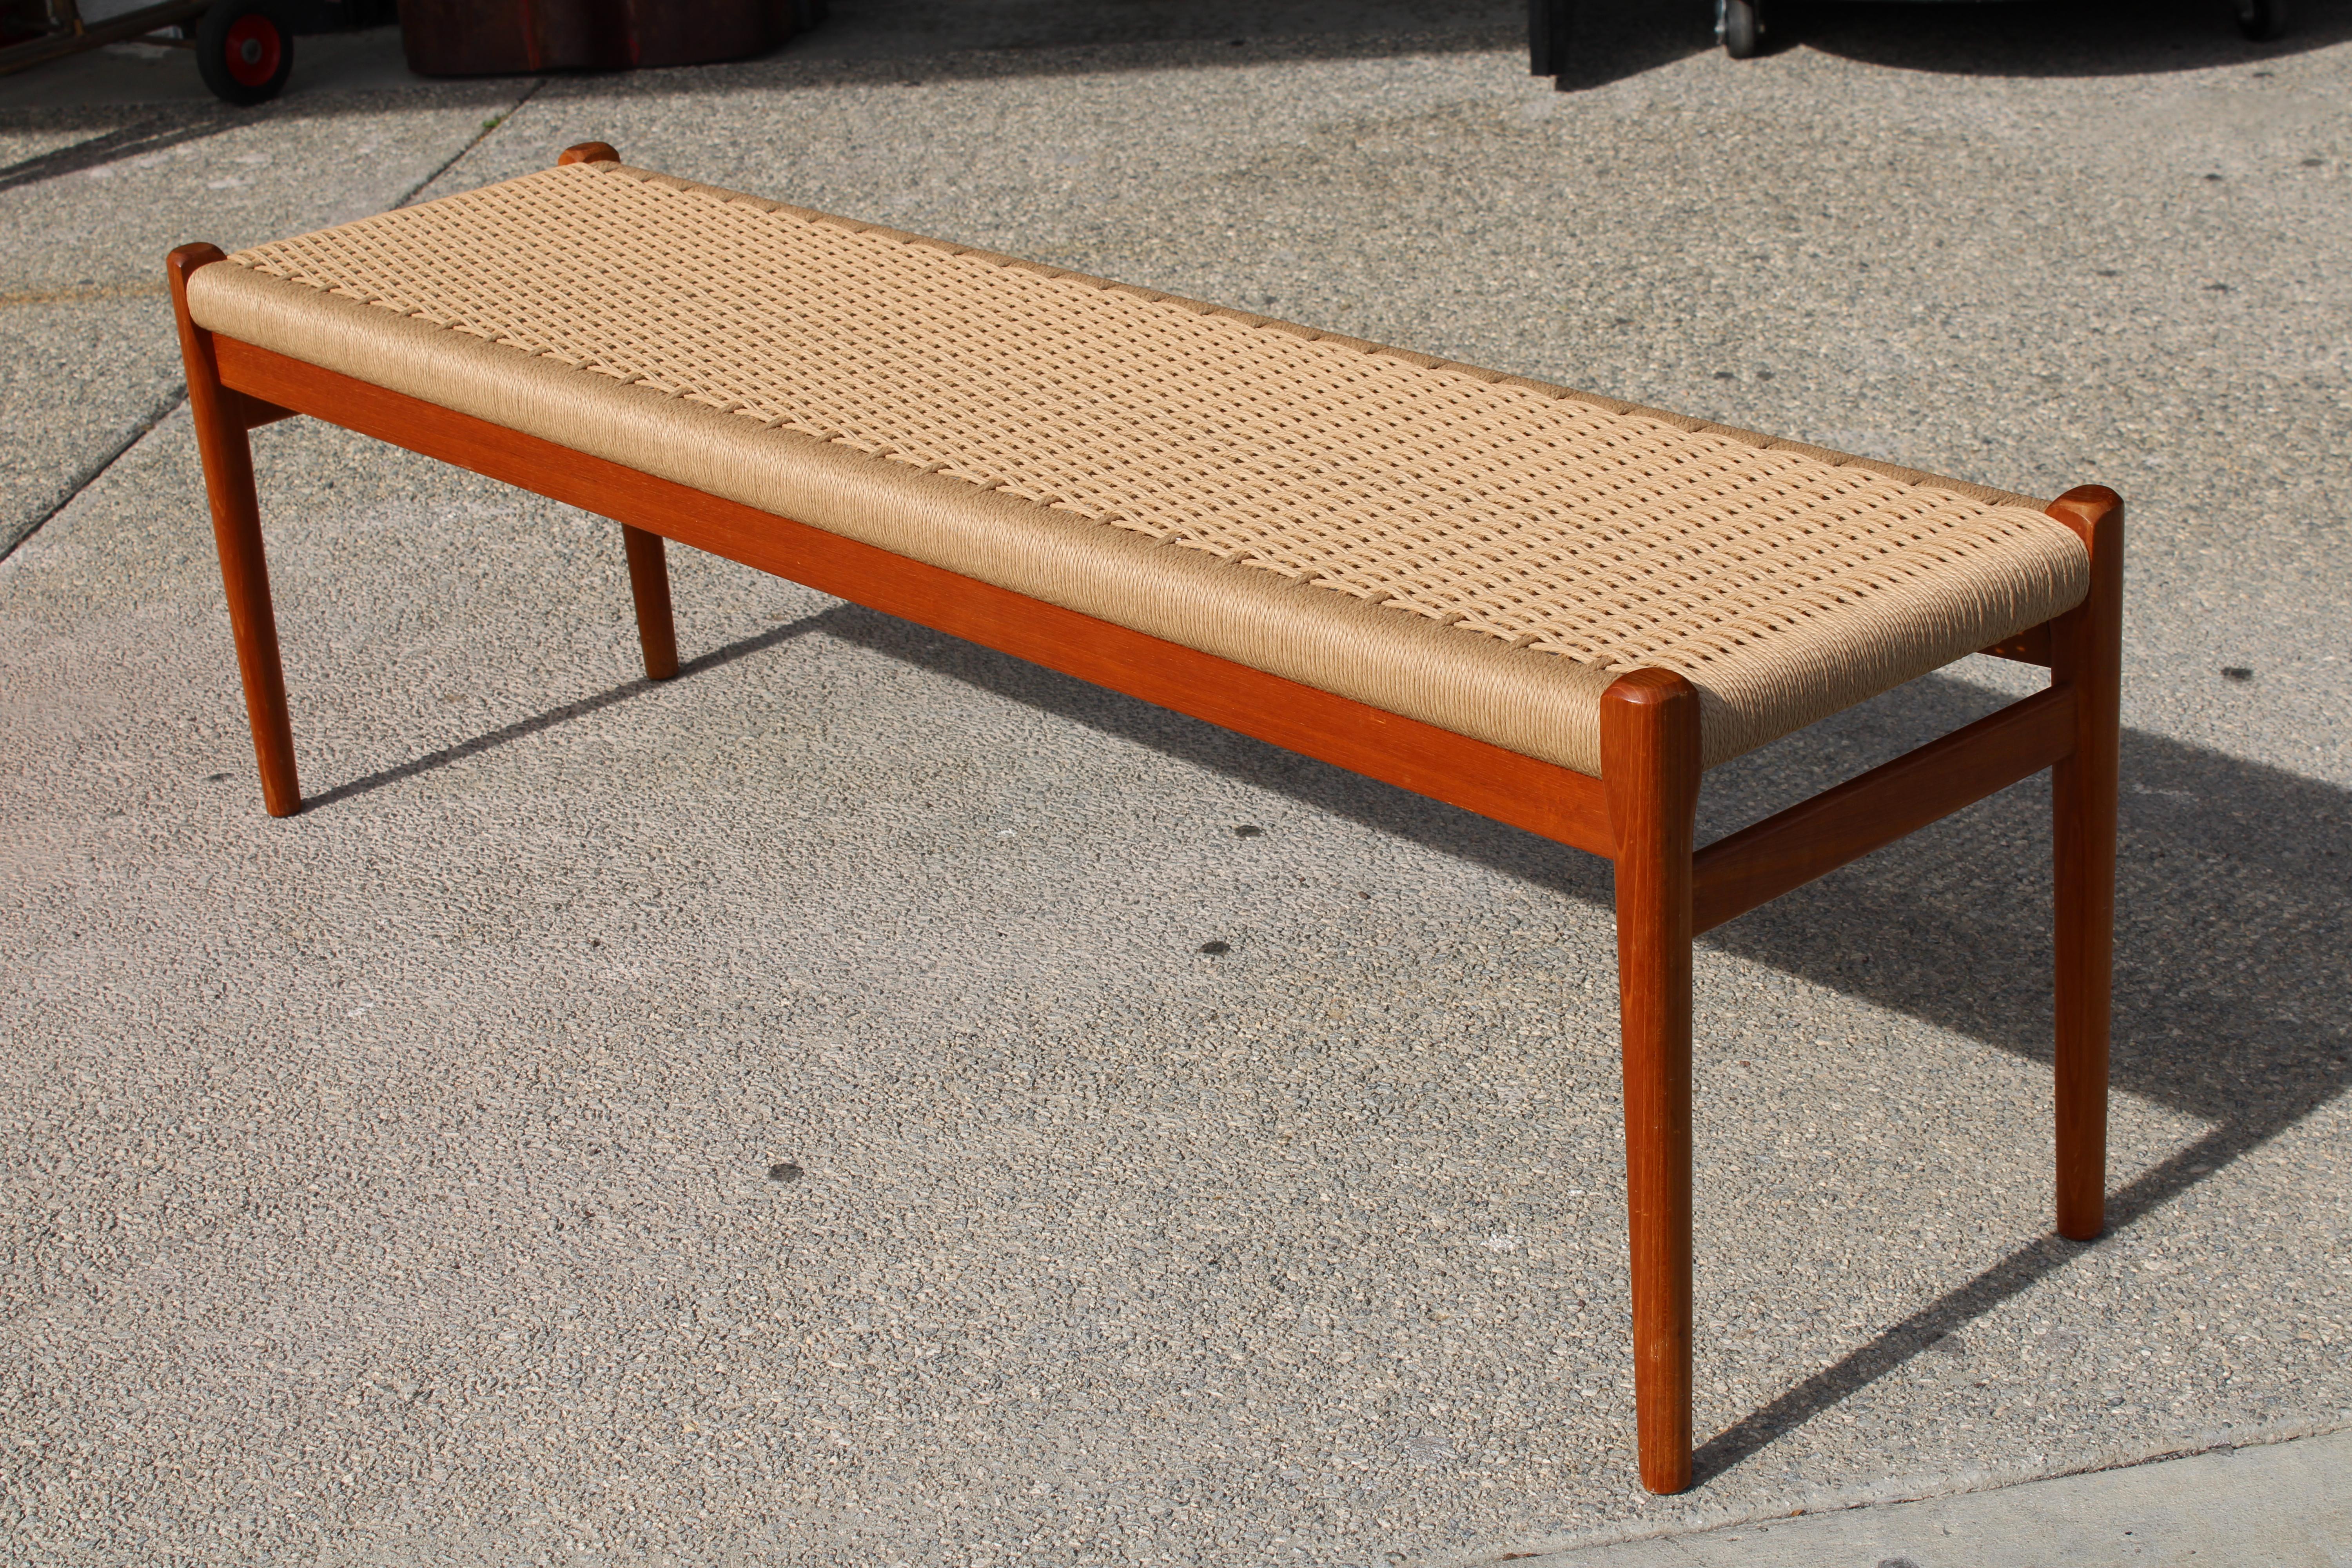 Iconic Danish modern paper cord and teak bench designed by Niels Otto Moller and produced by J.L. Mollers Mobelfabrik in Denmark. Manufacturers medallions J L Moller Models, Made in Denmark and FurnitureMakers Danish Control on the underside.  Bench